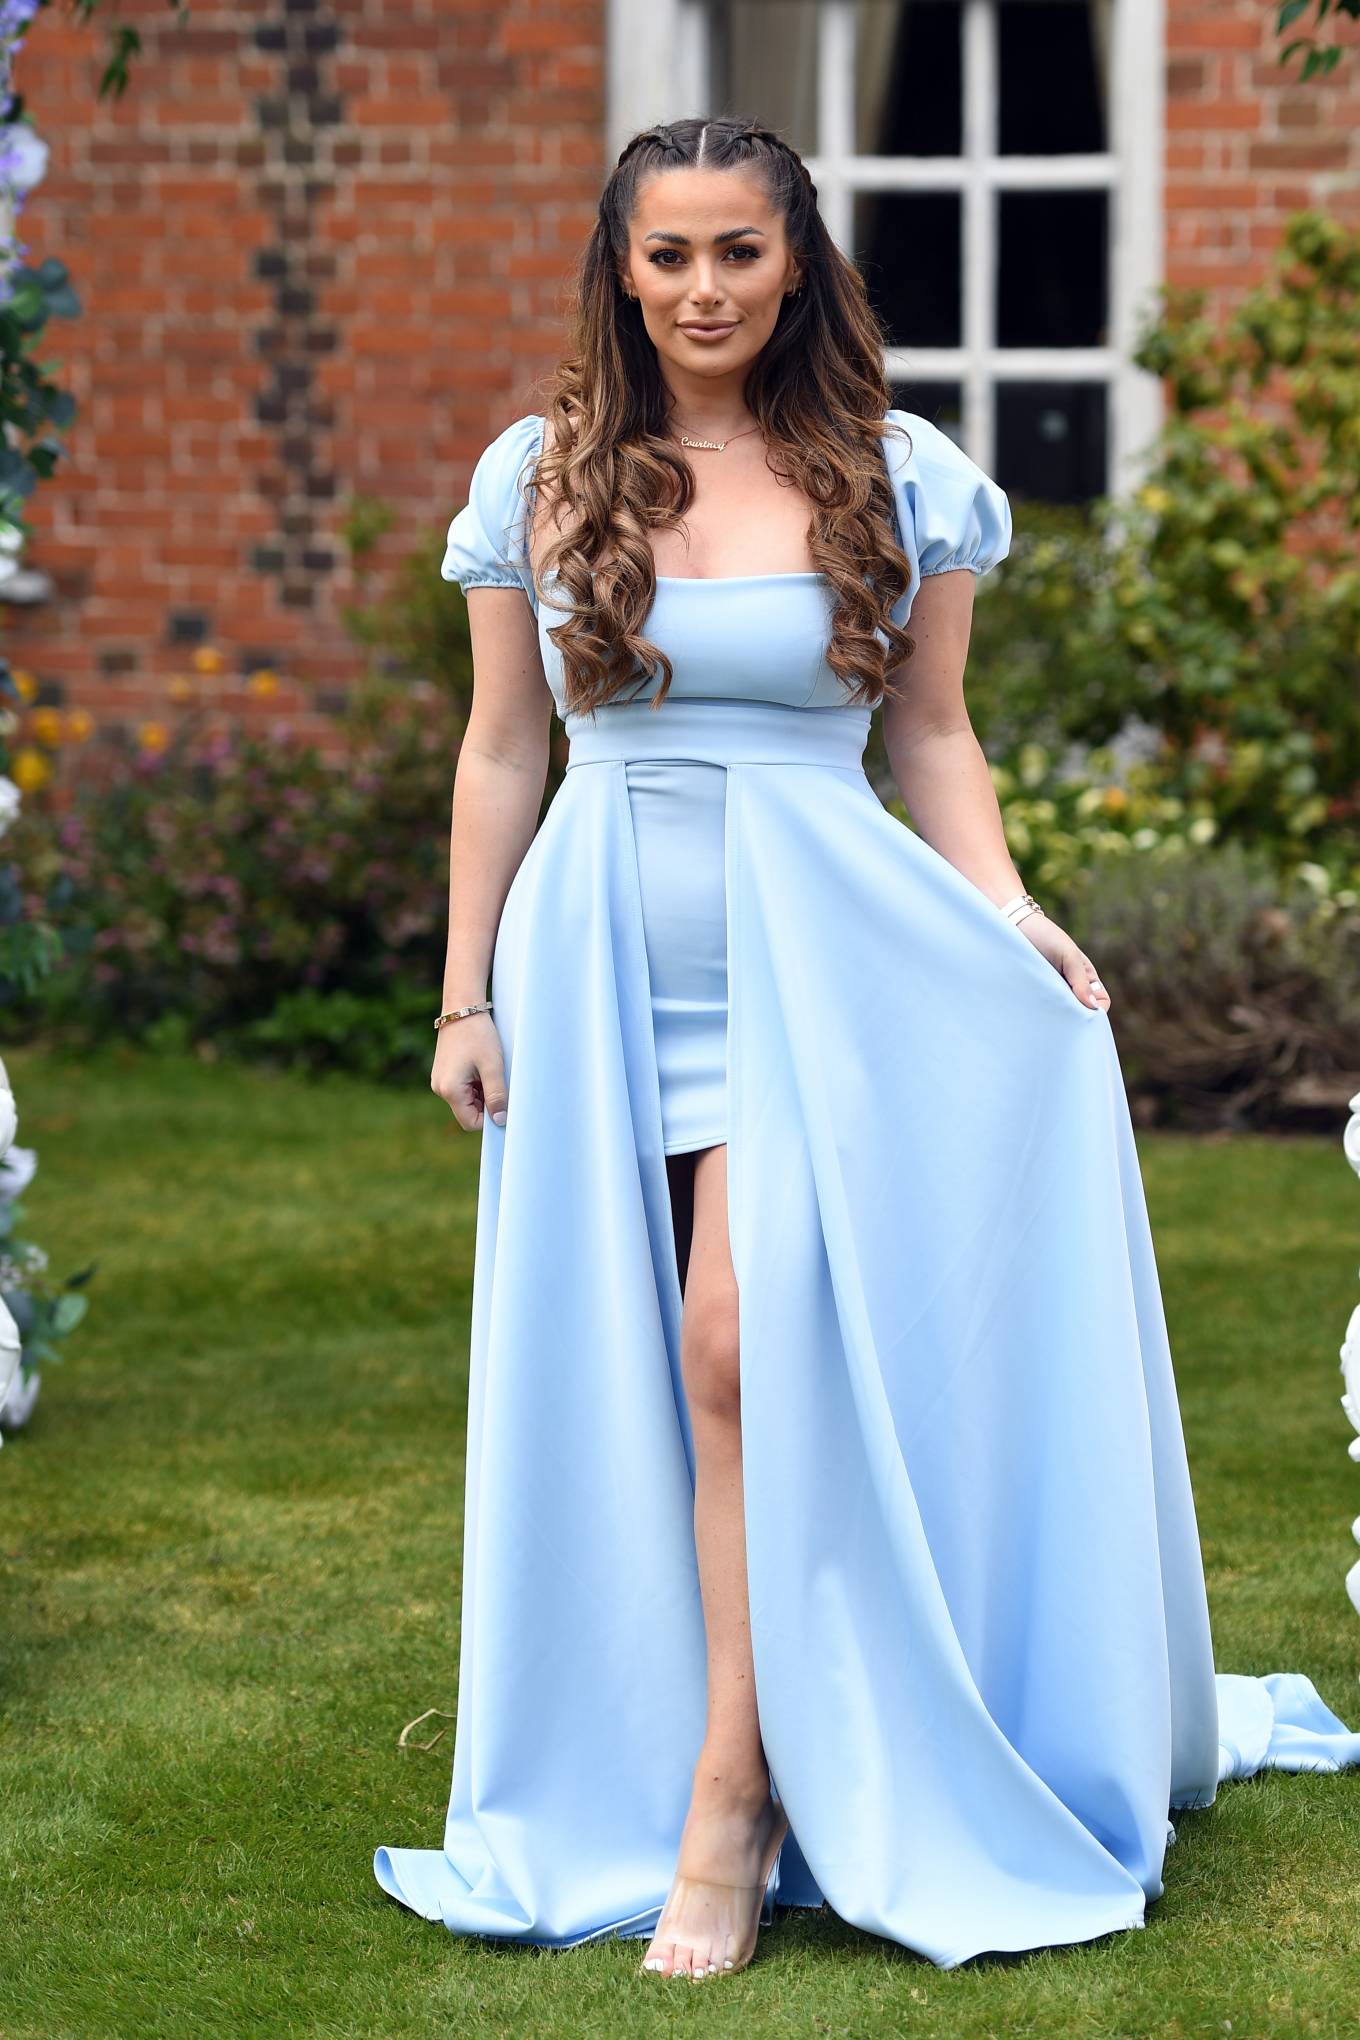 Courtney Green 2021 : Courtney Green – The Only Way is Essex TV Show filming – Bridgerton Special in Essex-03